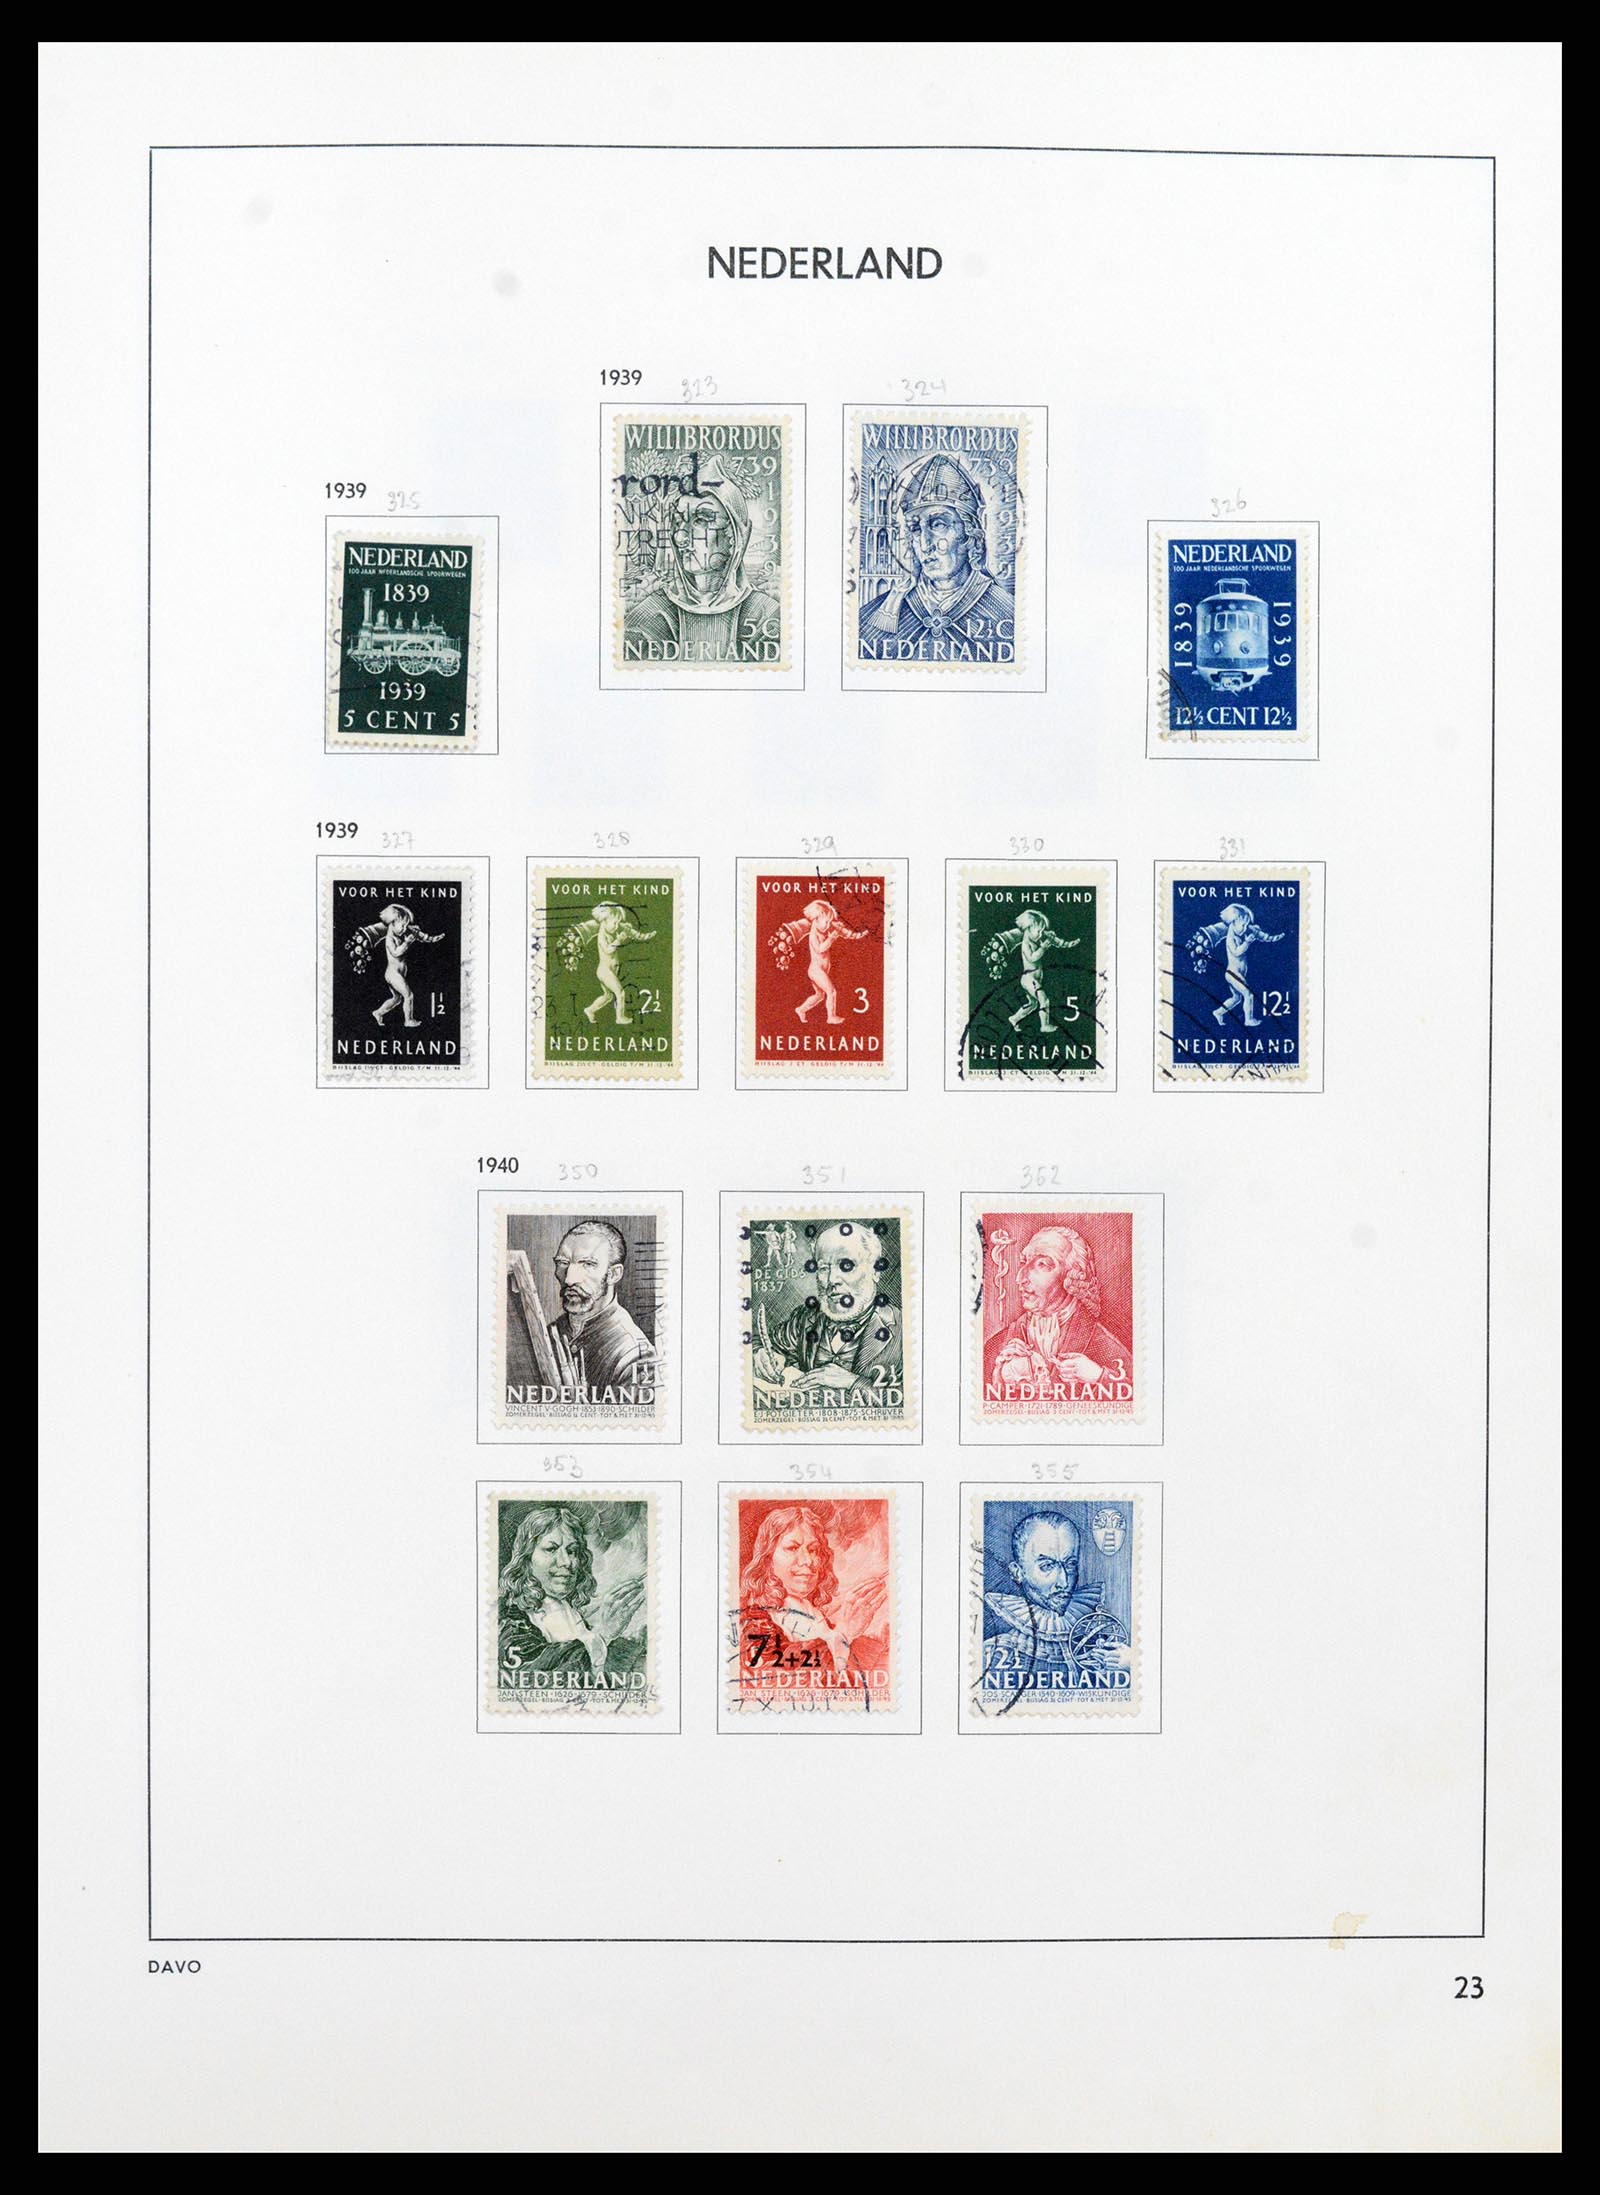 37346 023 - Stamp collection 37346 Netherlands 1852-1996.